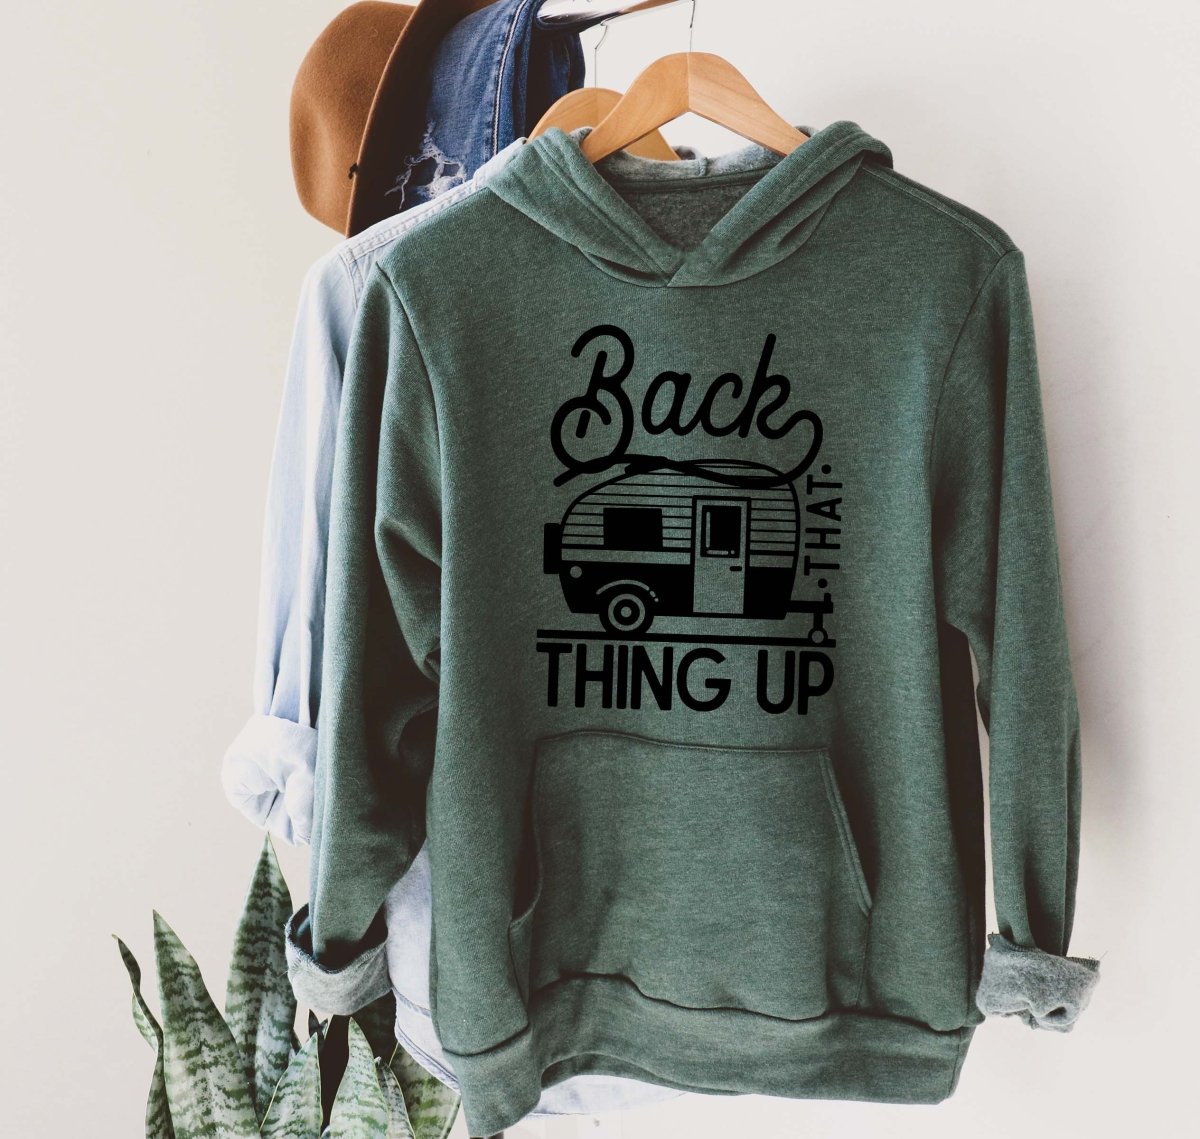 Back That Thing Up Hooded Sweatshirt - Limeberry Designs